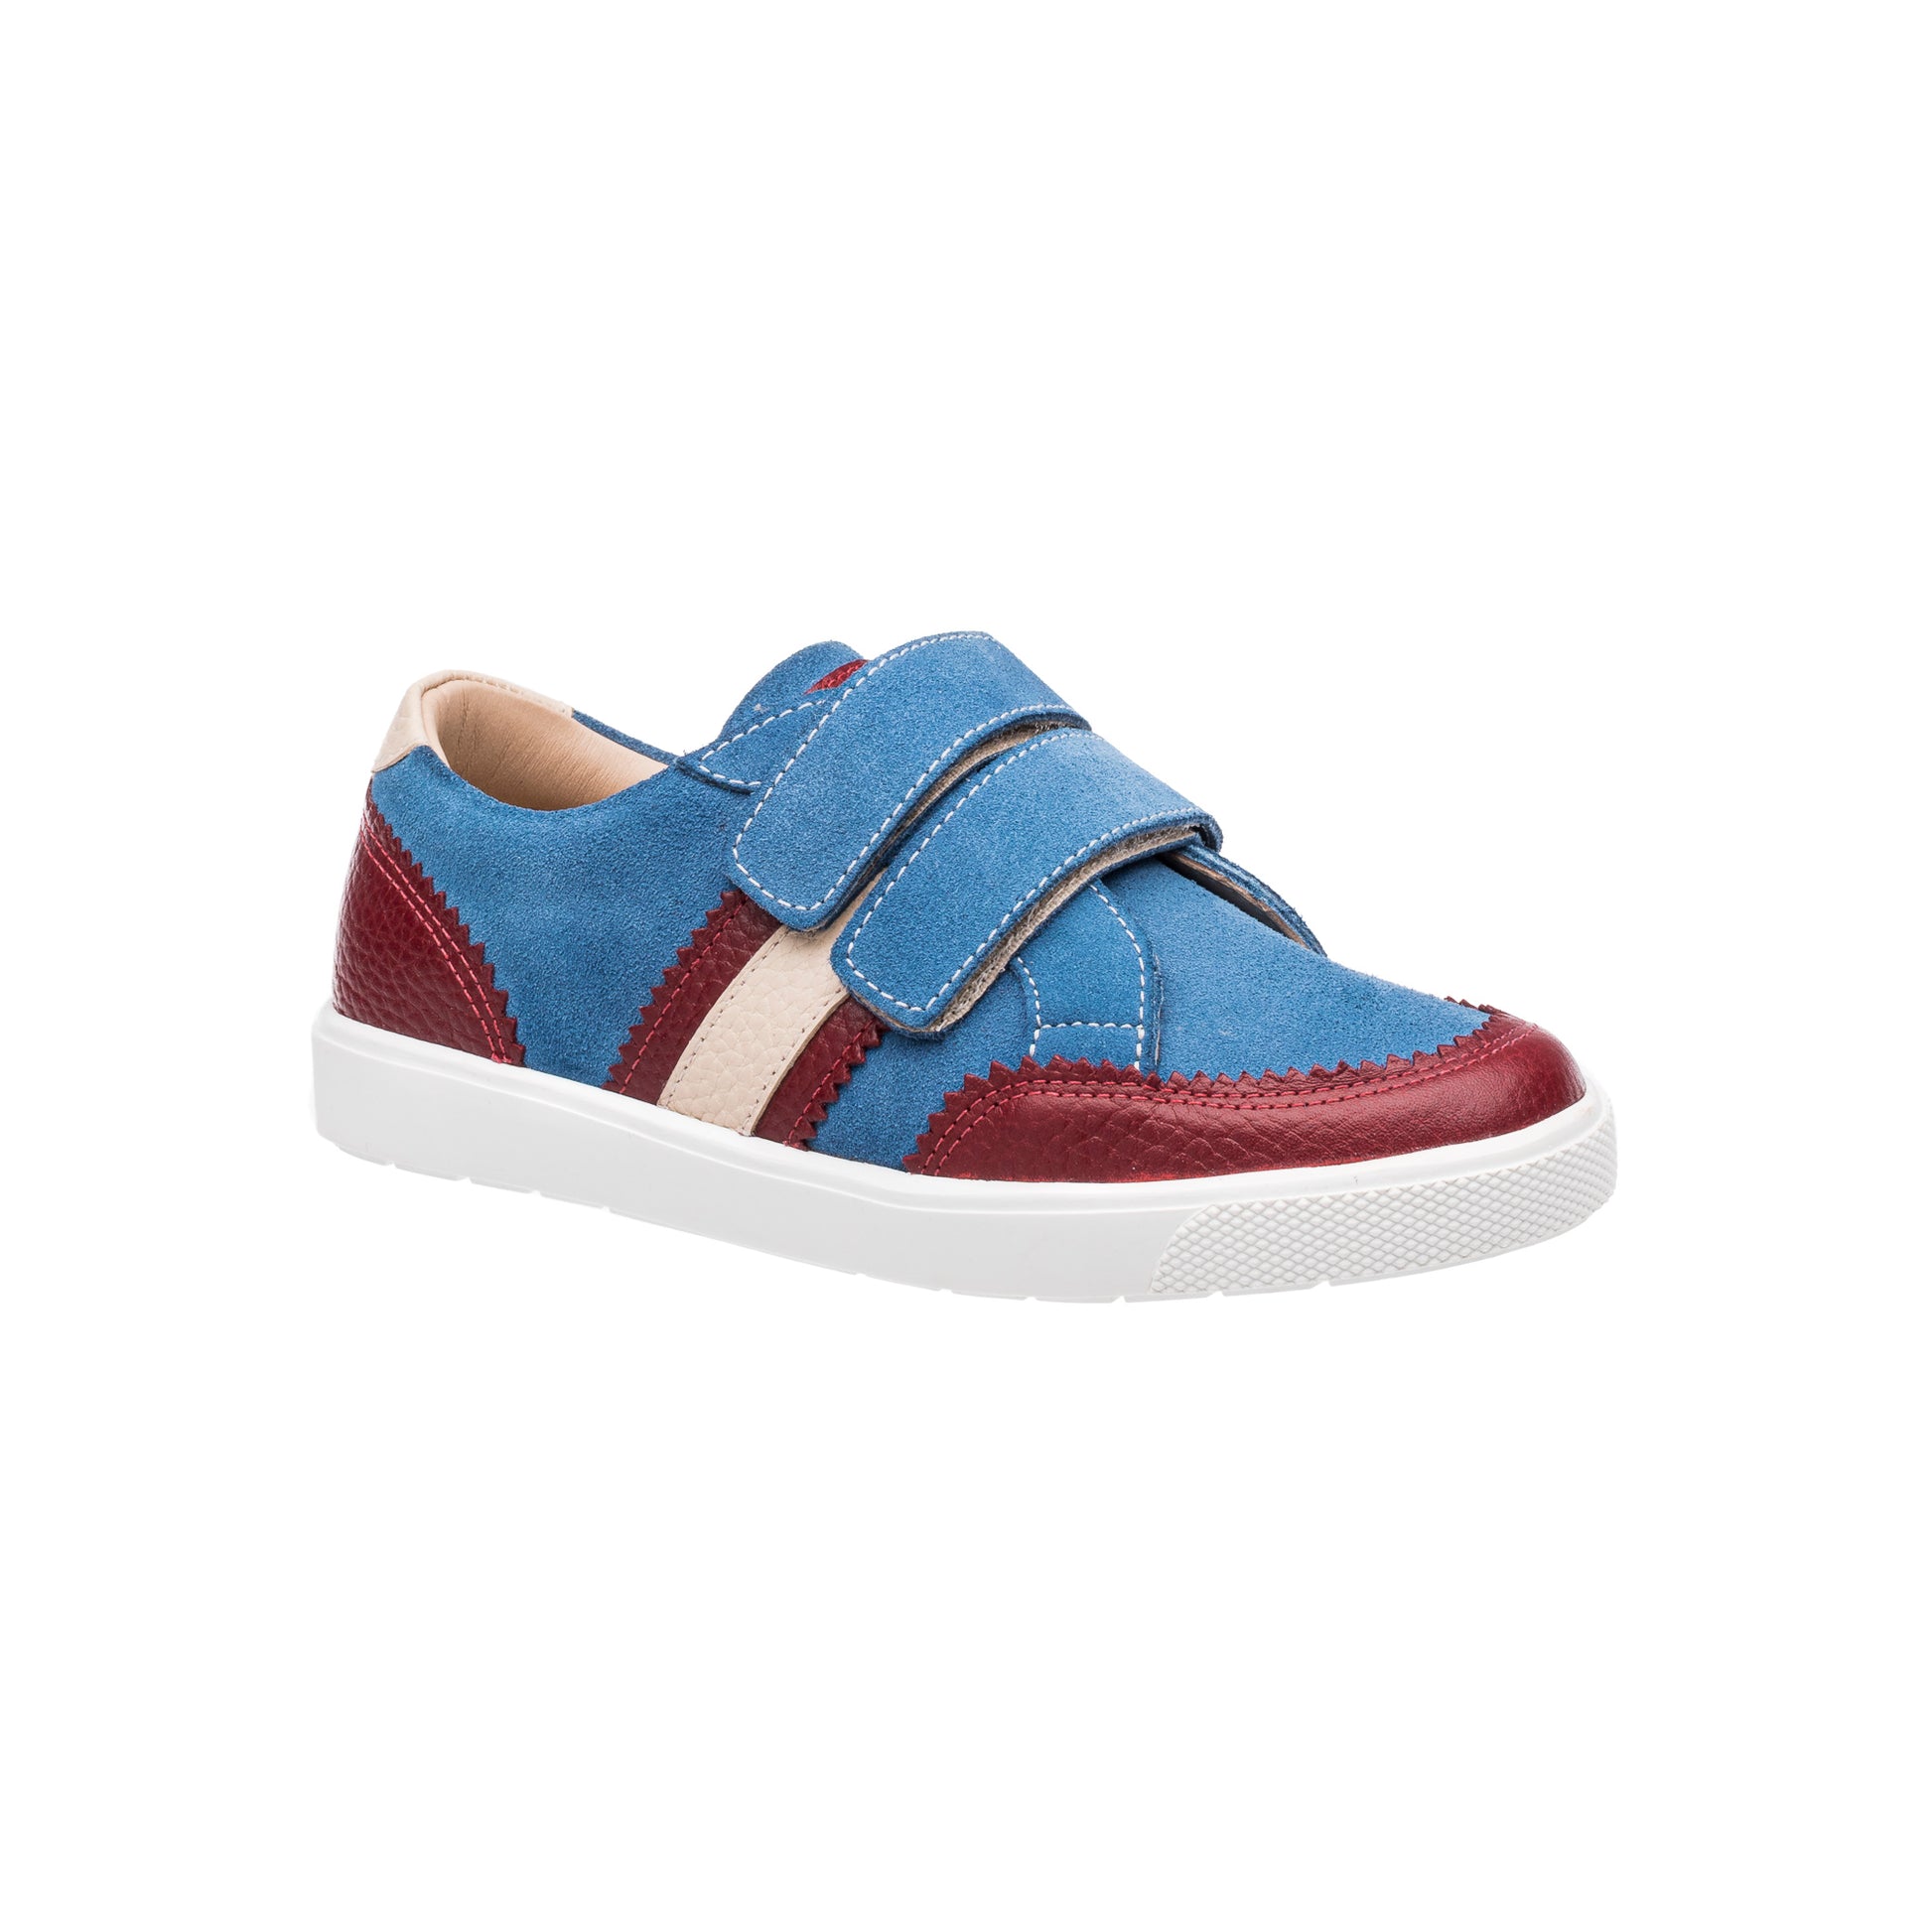 Leather fashion sneaker for kids